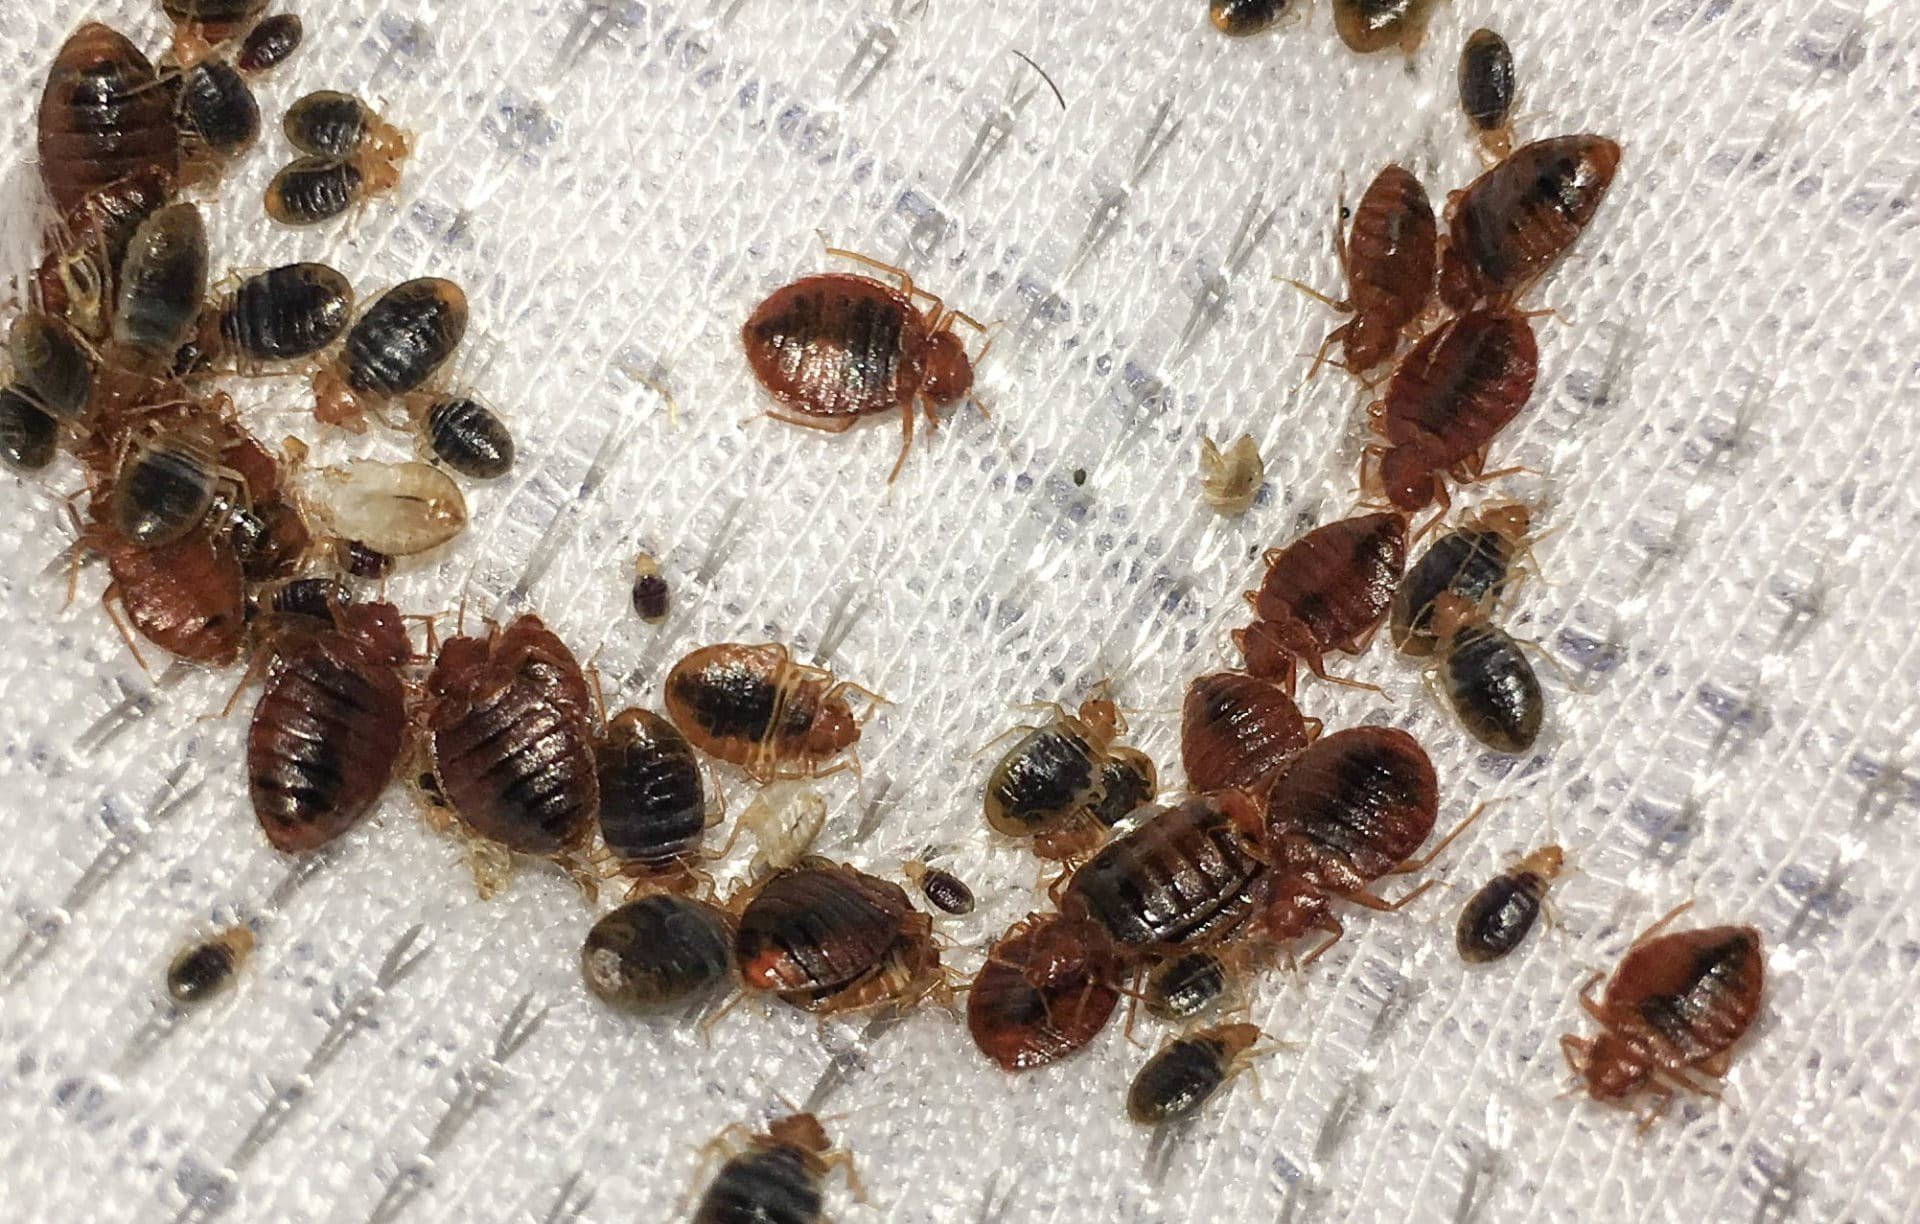 Can Bed Bugs Be Controlled?